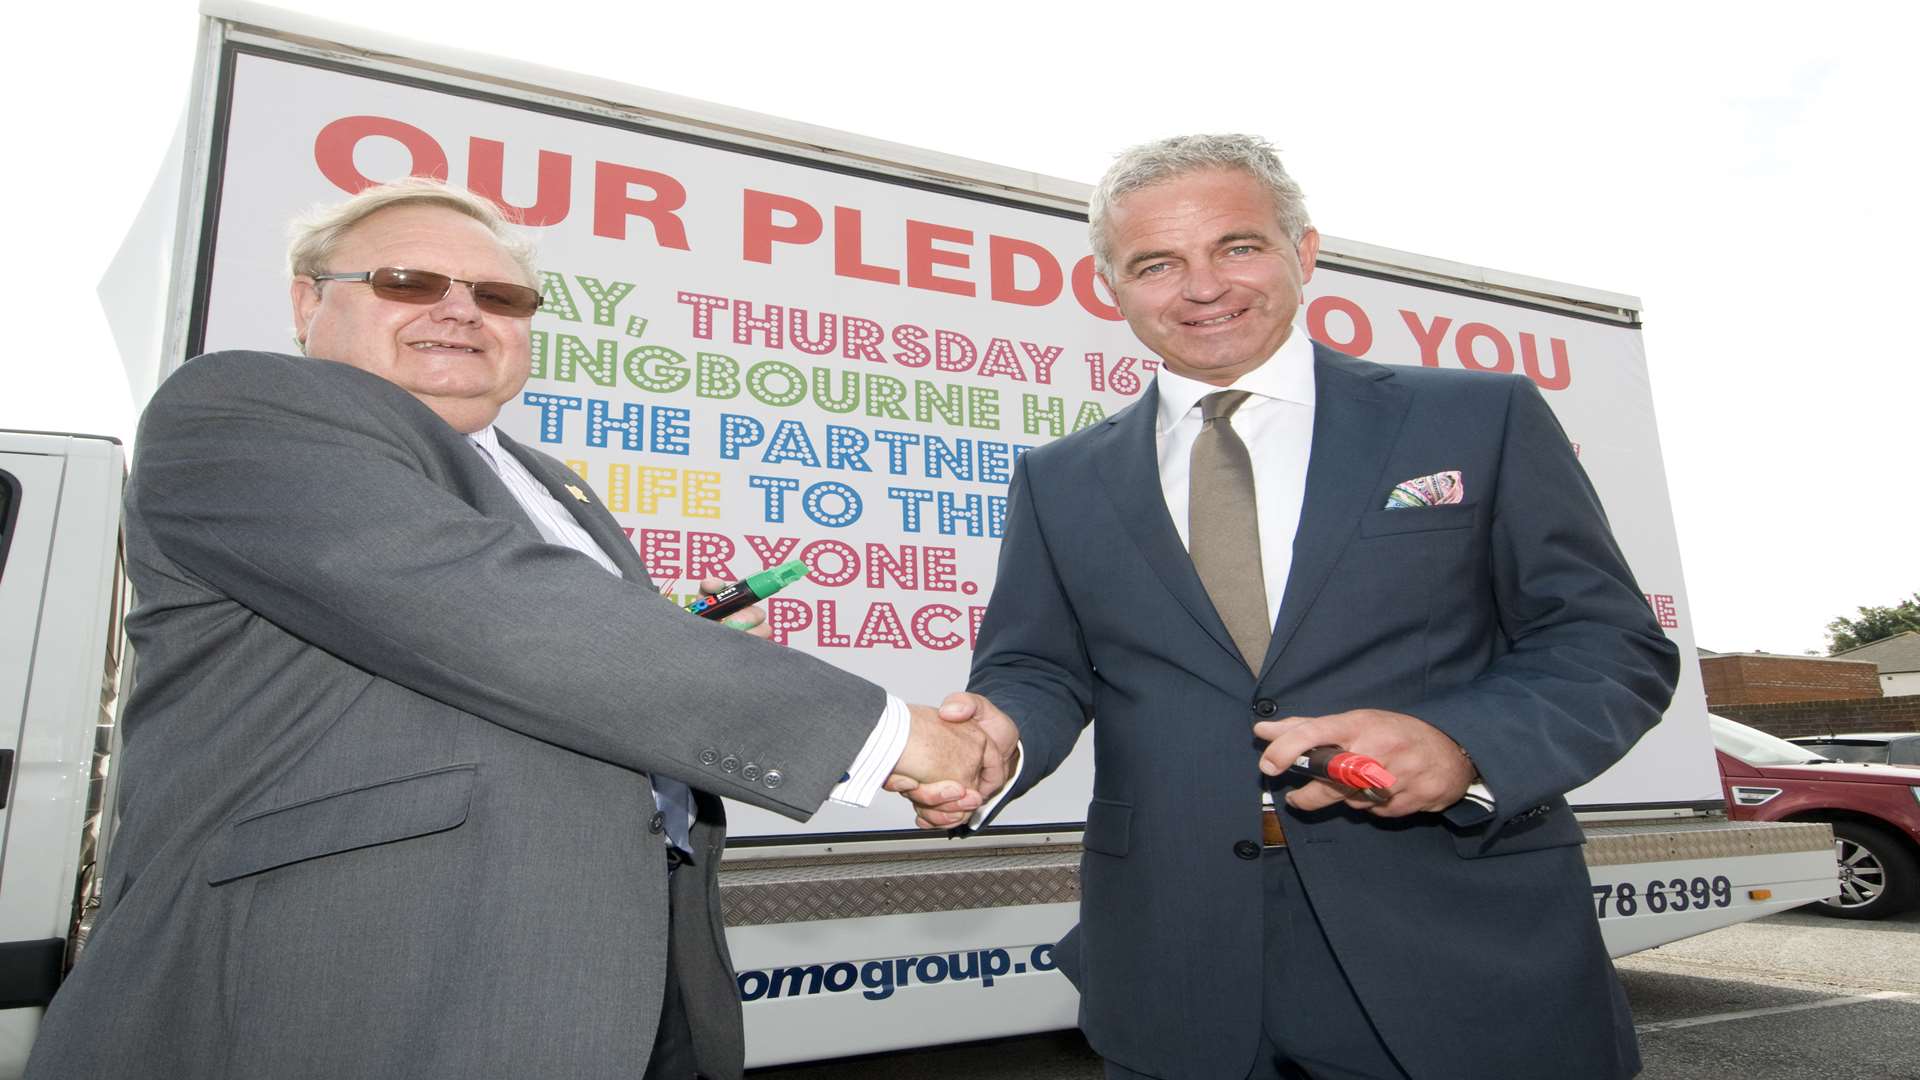 Cllr Andrew Bowles, left, and Richard Upton at the launch of the project back in August 2012